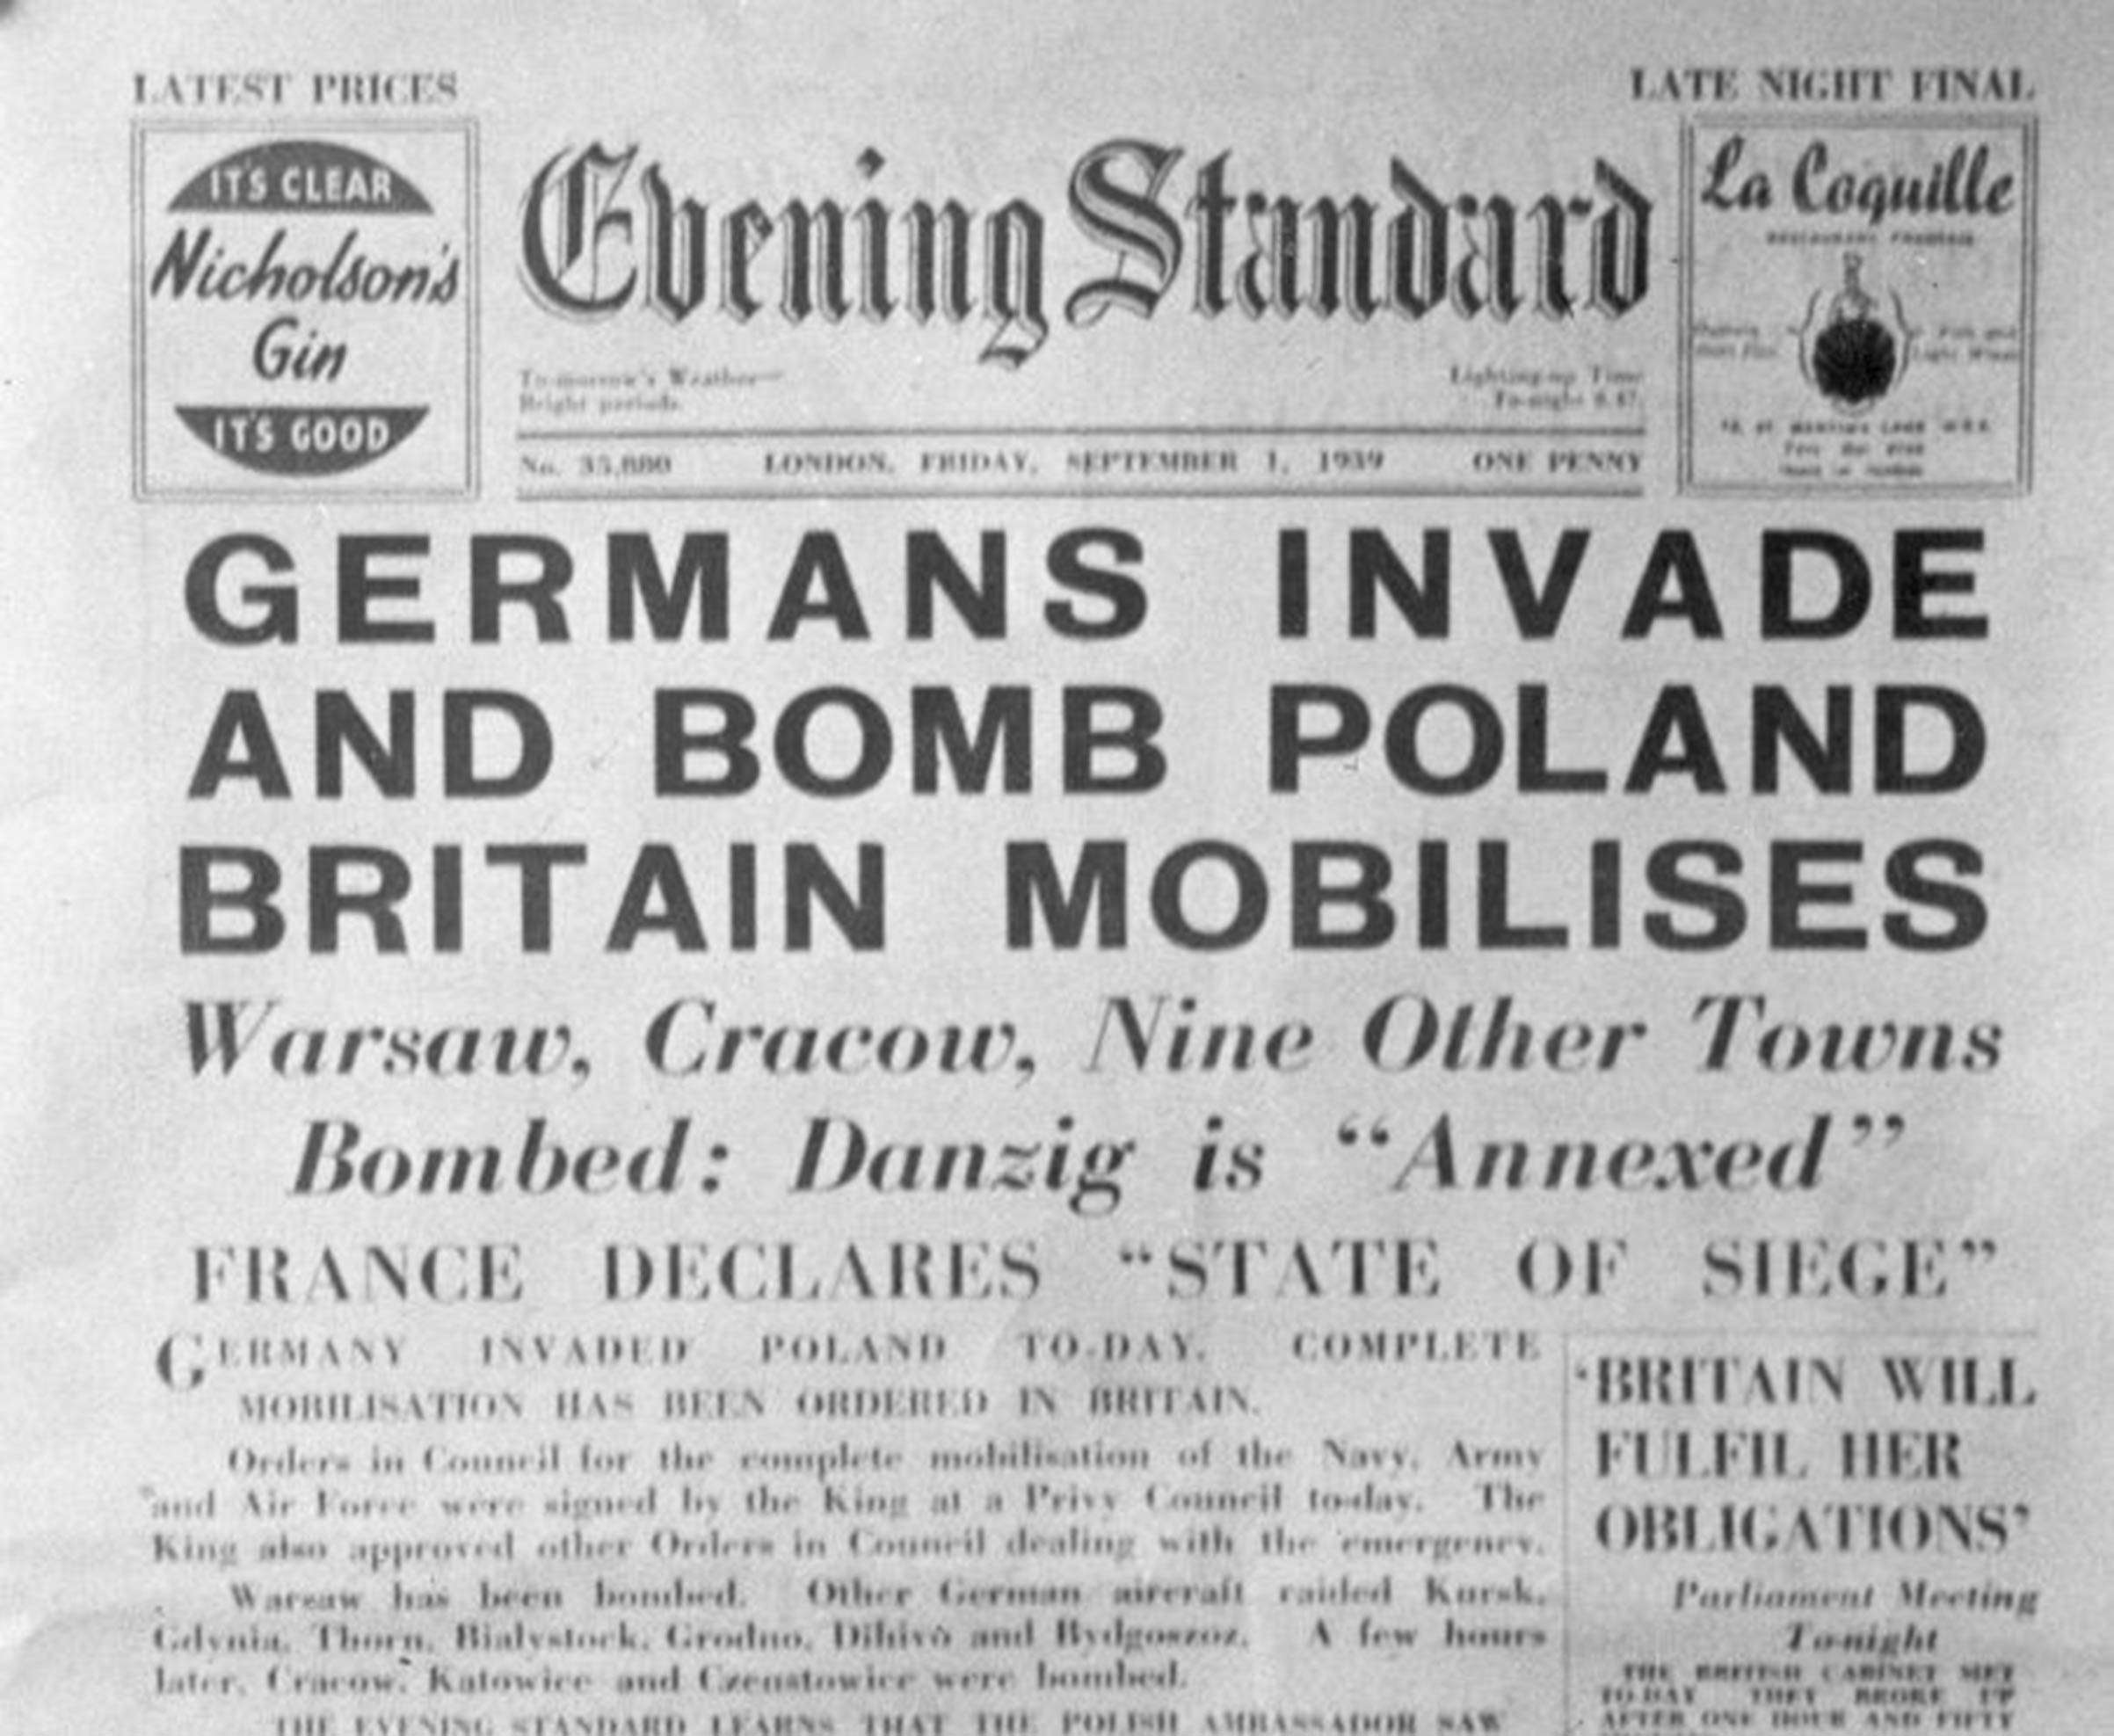 The front page of London's <i>Evening Standard</i> newspaper on Sept. 1, 1939, announcing the German invasion of Poland. (Hulton Archive—Getty Images)